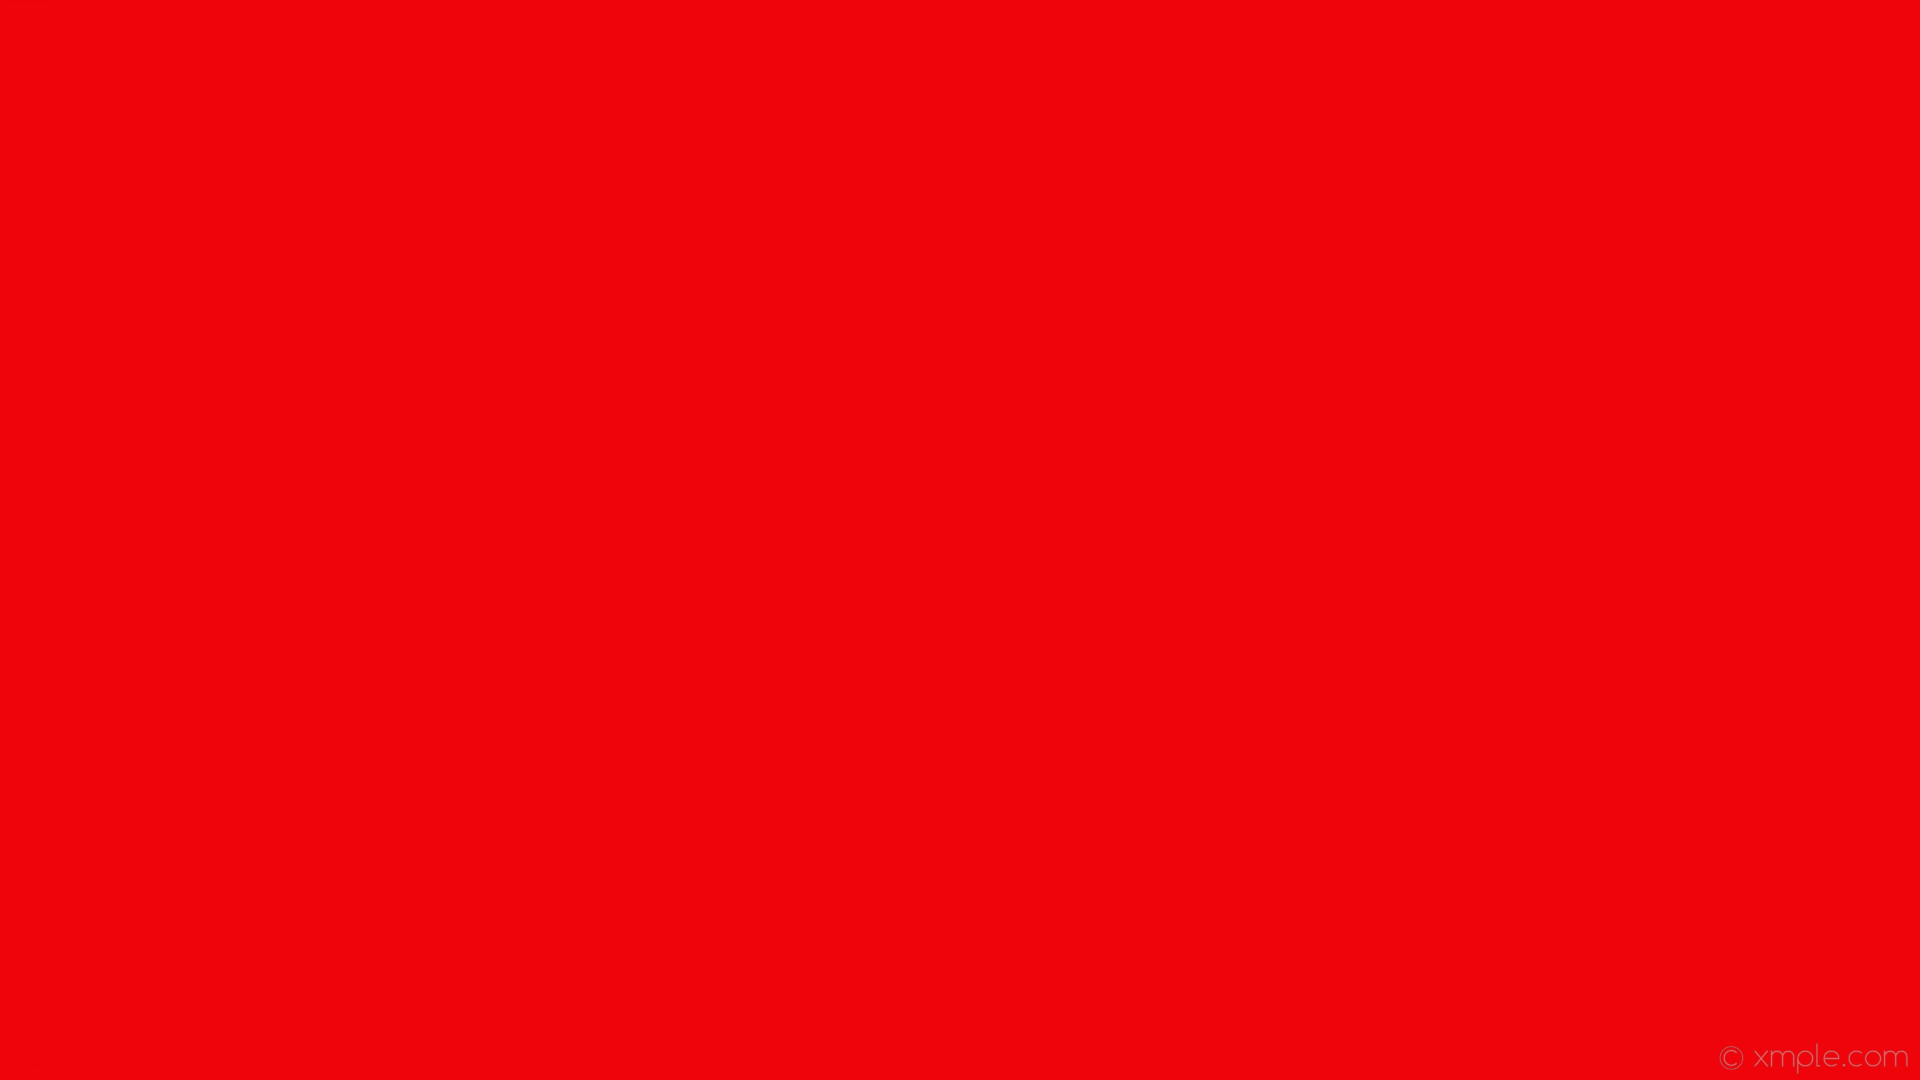 1920x1080 wallpaper plain solid color red one colour single #ee040a